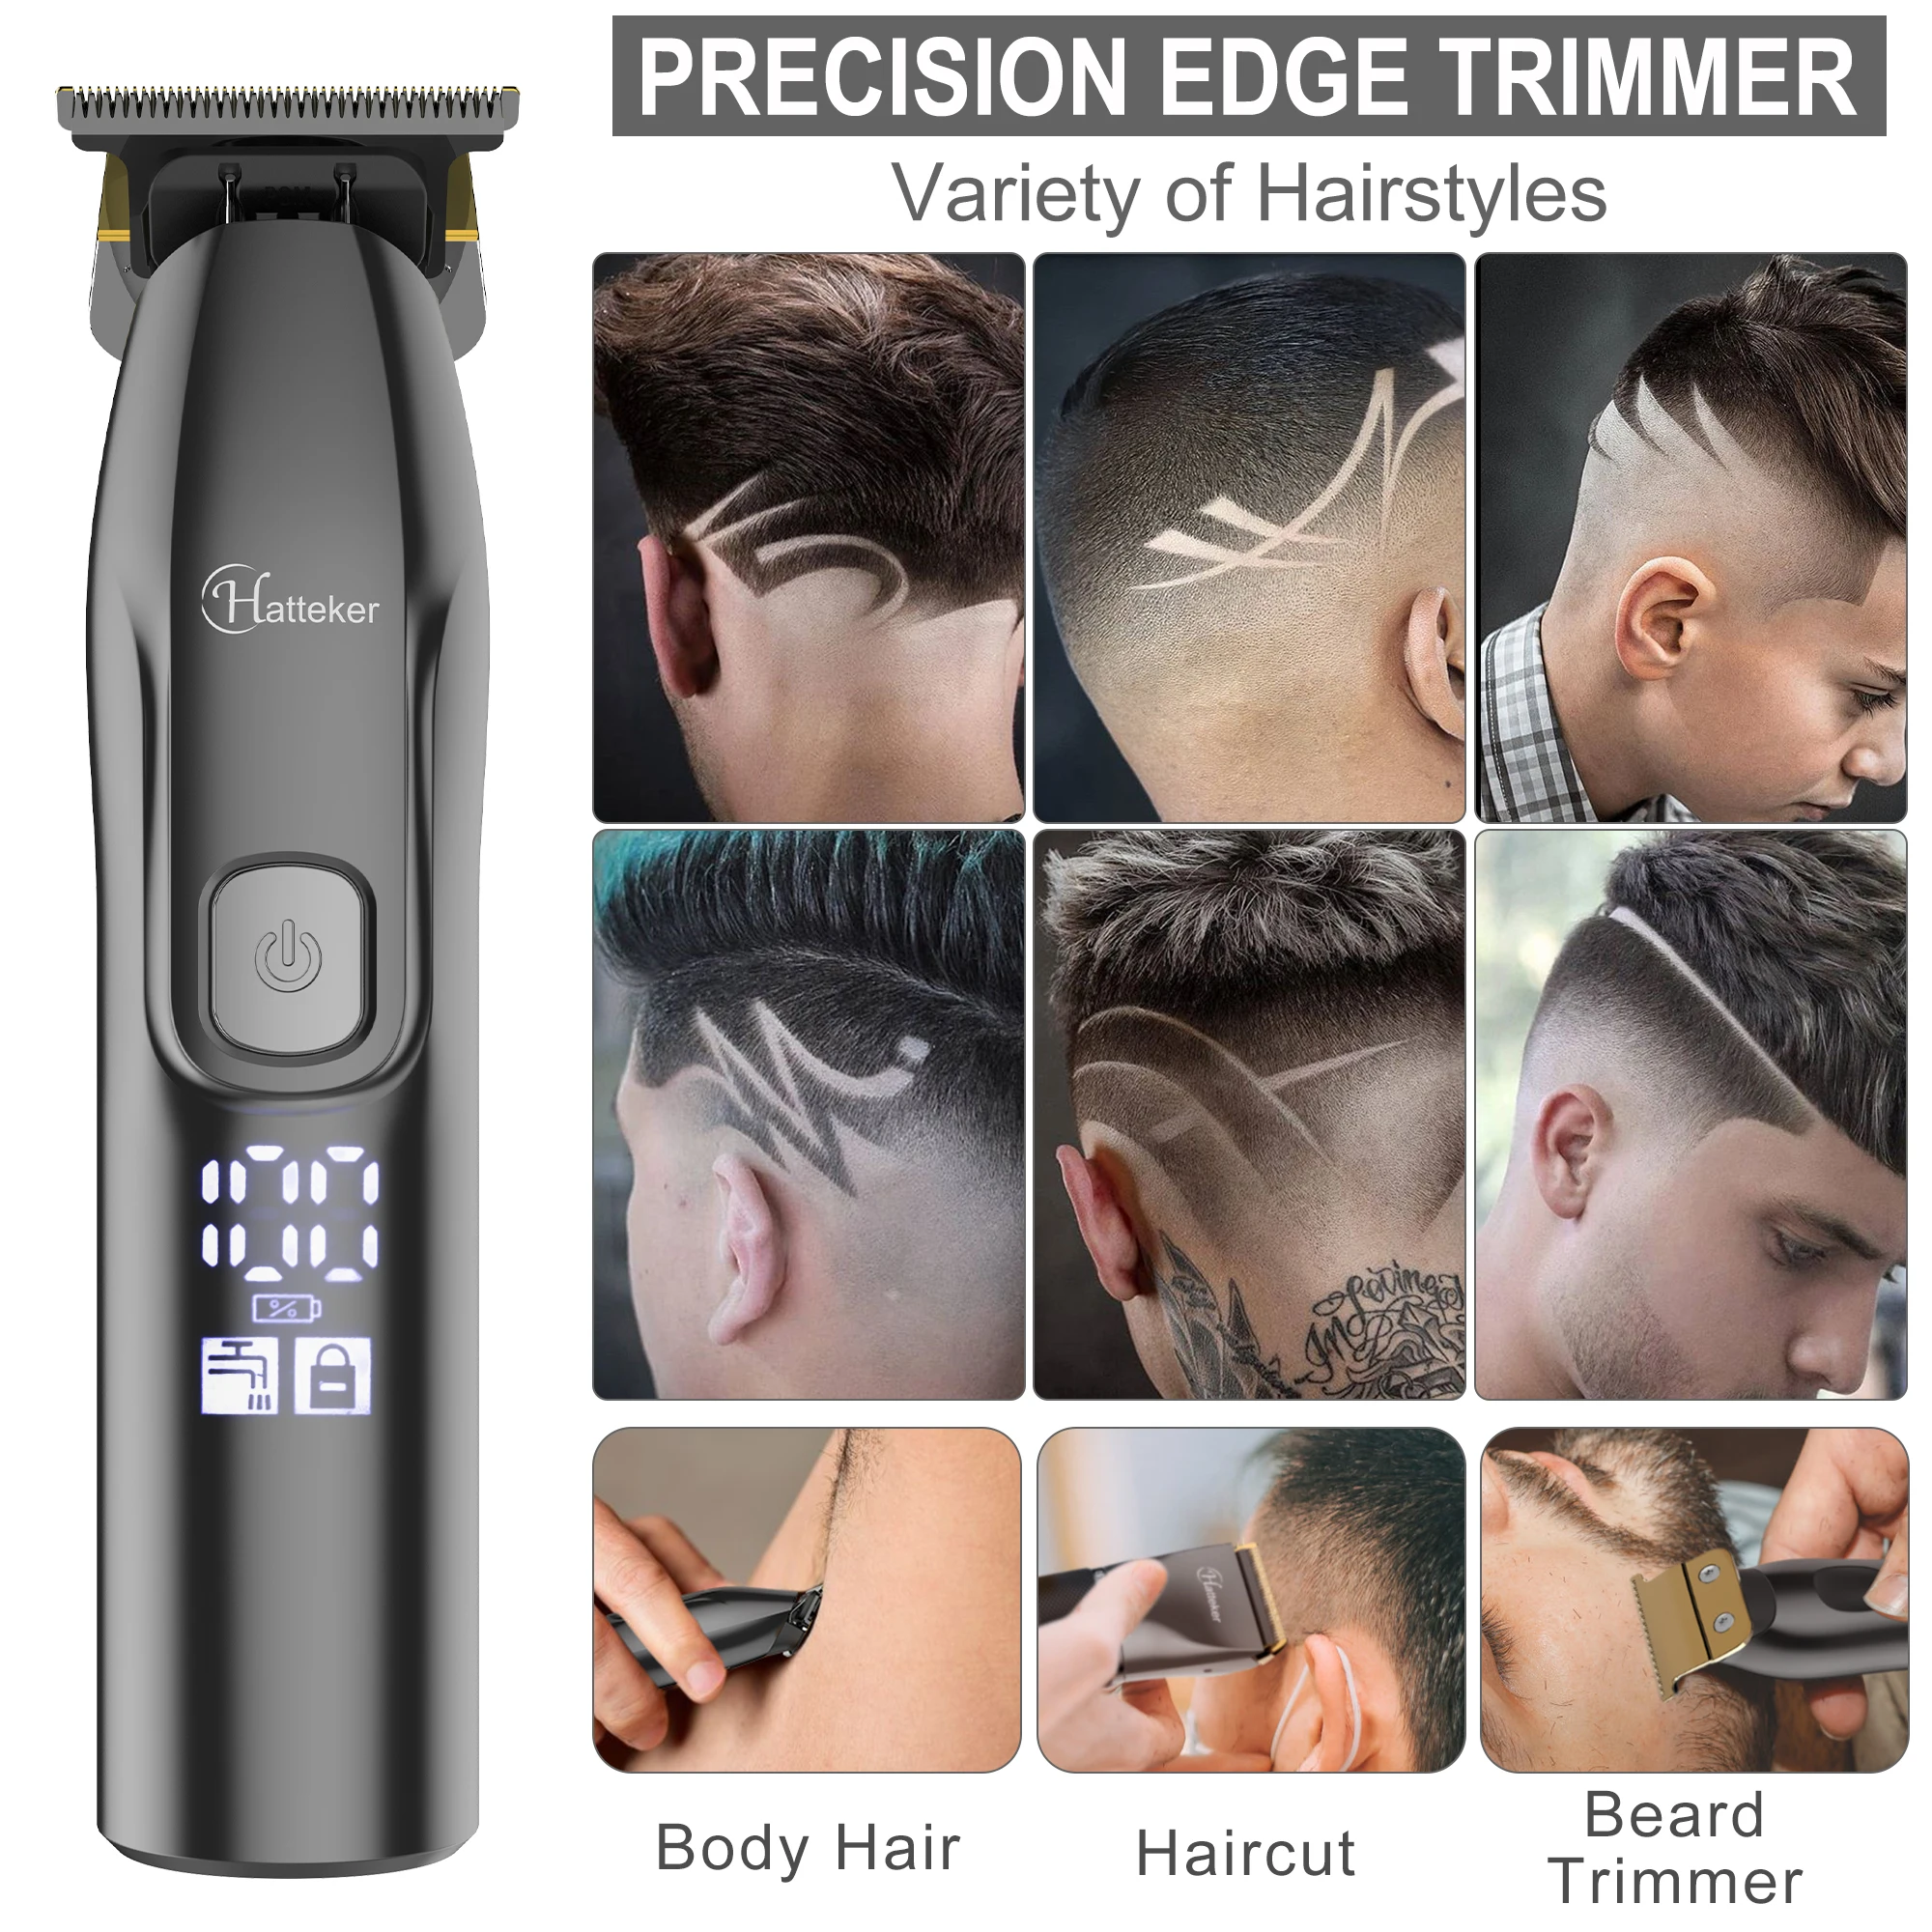 Hatteker Professional Hair Clippers and T-Blade Trimmer Kit for Men Cordless Beard Barber Clipper Hair Cutting Kit Haircut Groom enlarge